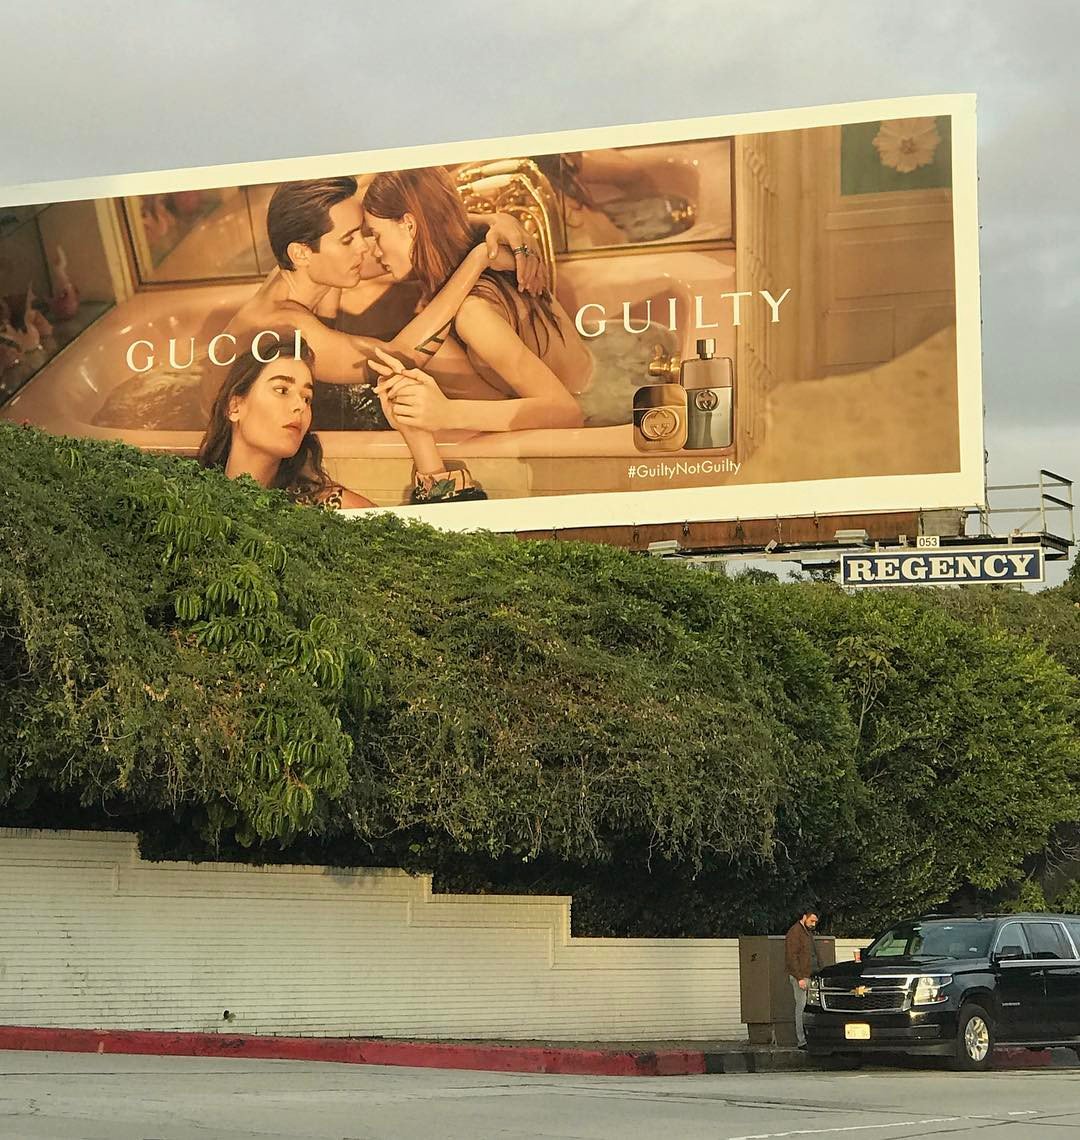 .@Gucci - Sunset blvd, Hollywood California https://t.co/PsRgSM8wOs https://t.co/75BmWmq6wS